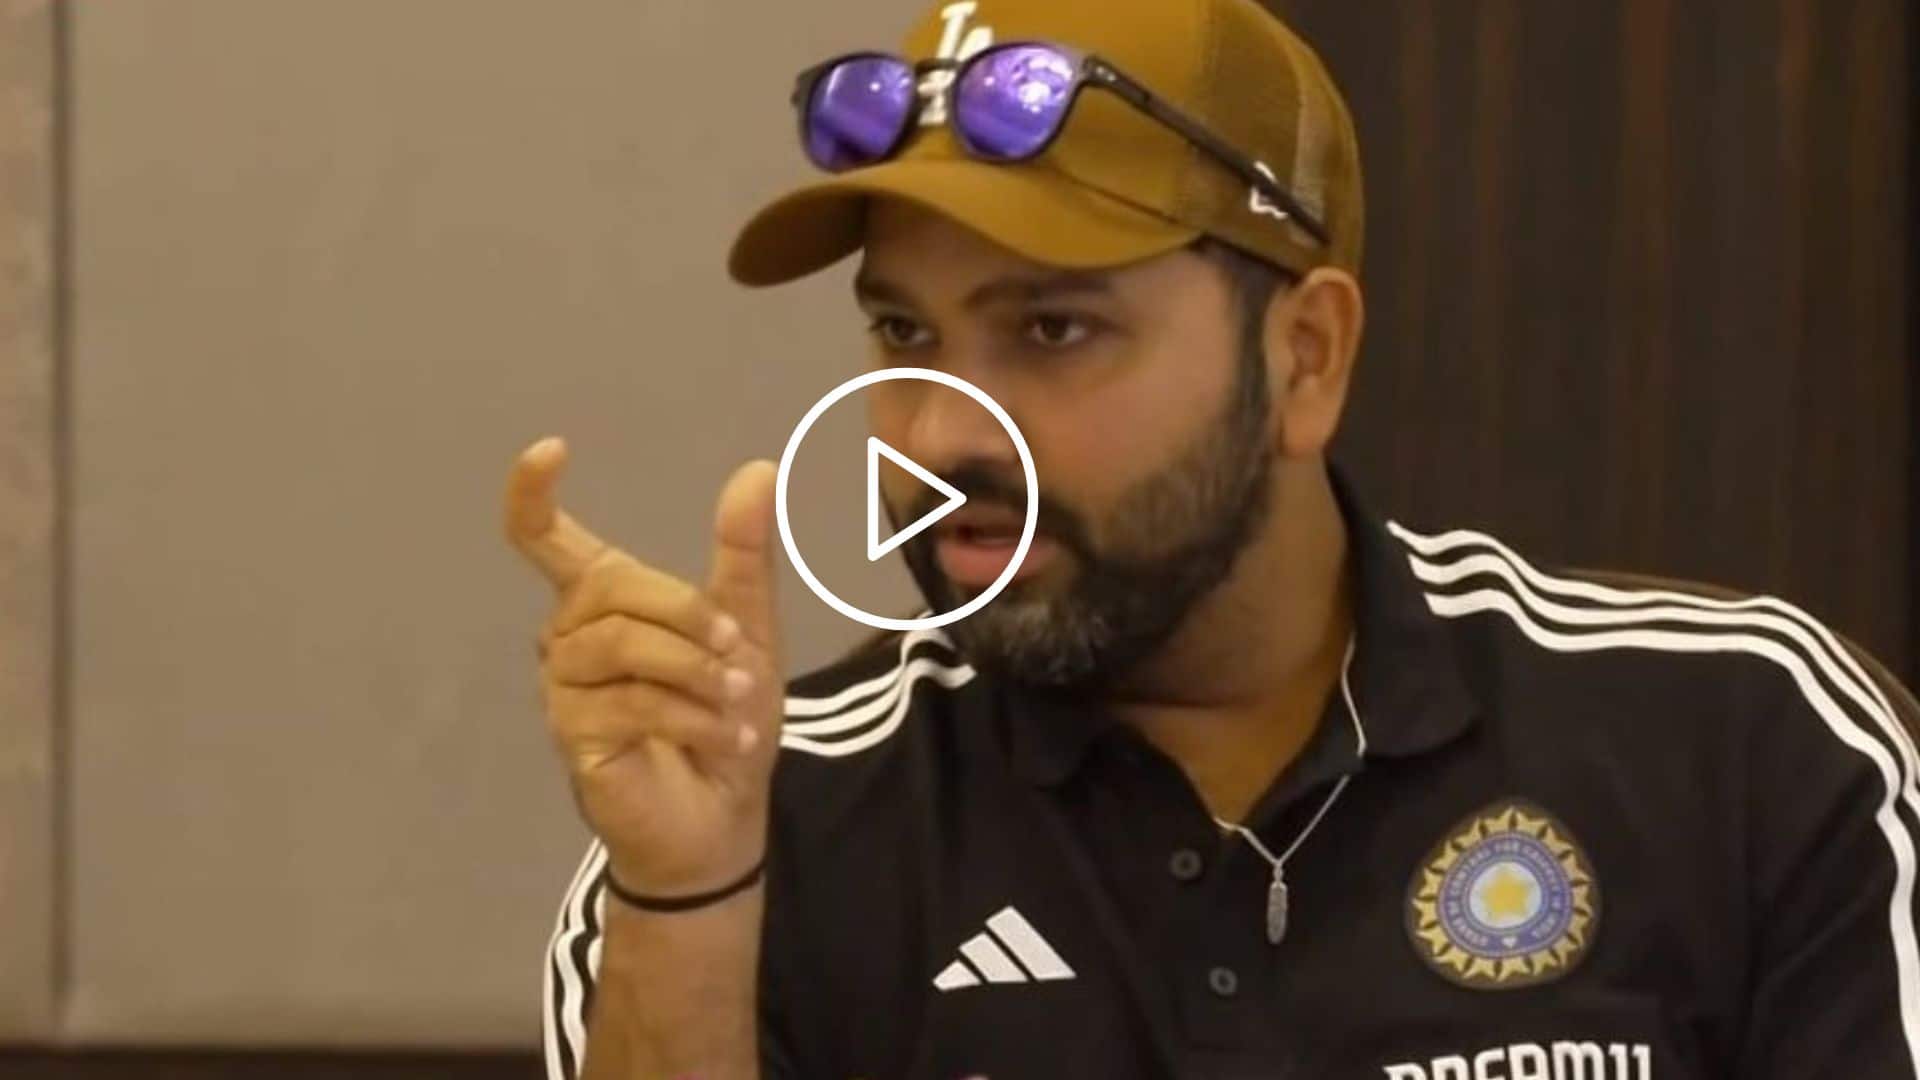 [WATCH] 'Yeh Pagalpanti Nahi Karte Hum...' : Rohit Sharma's Mic Drop Moment, Leaves Everyone With Laughter